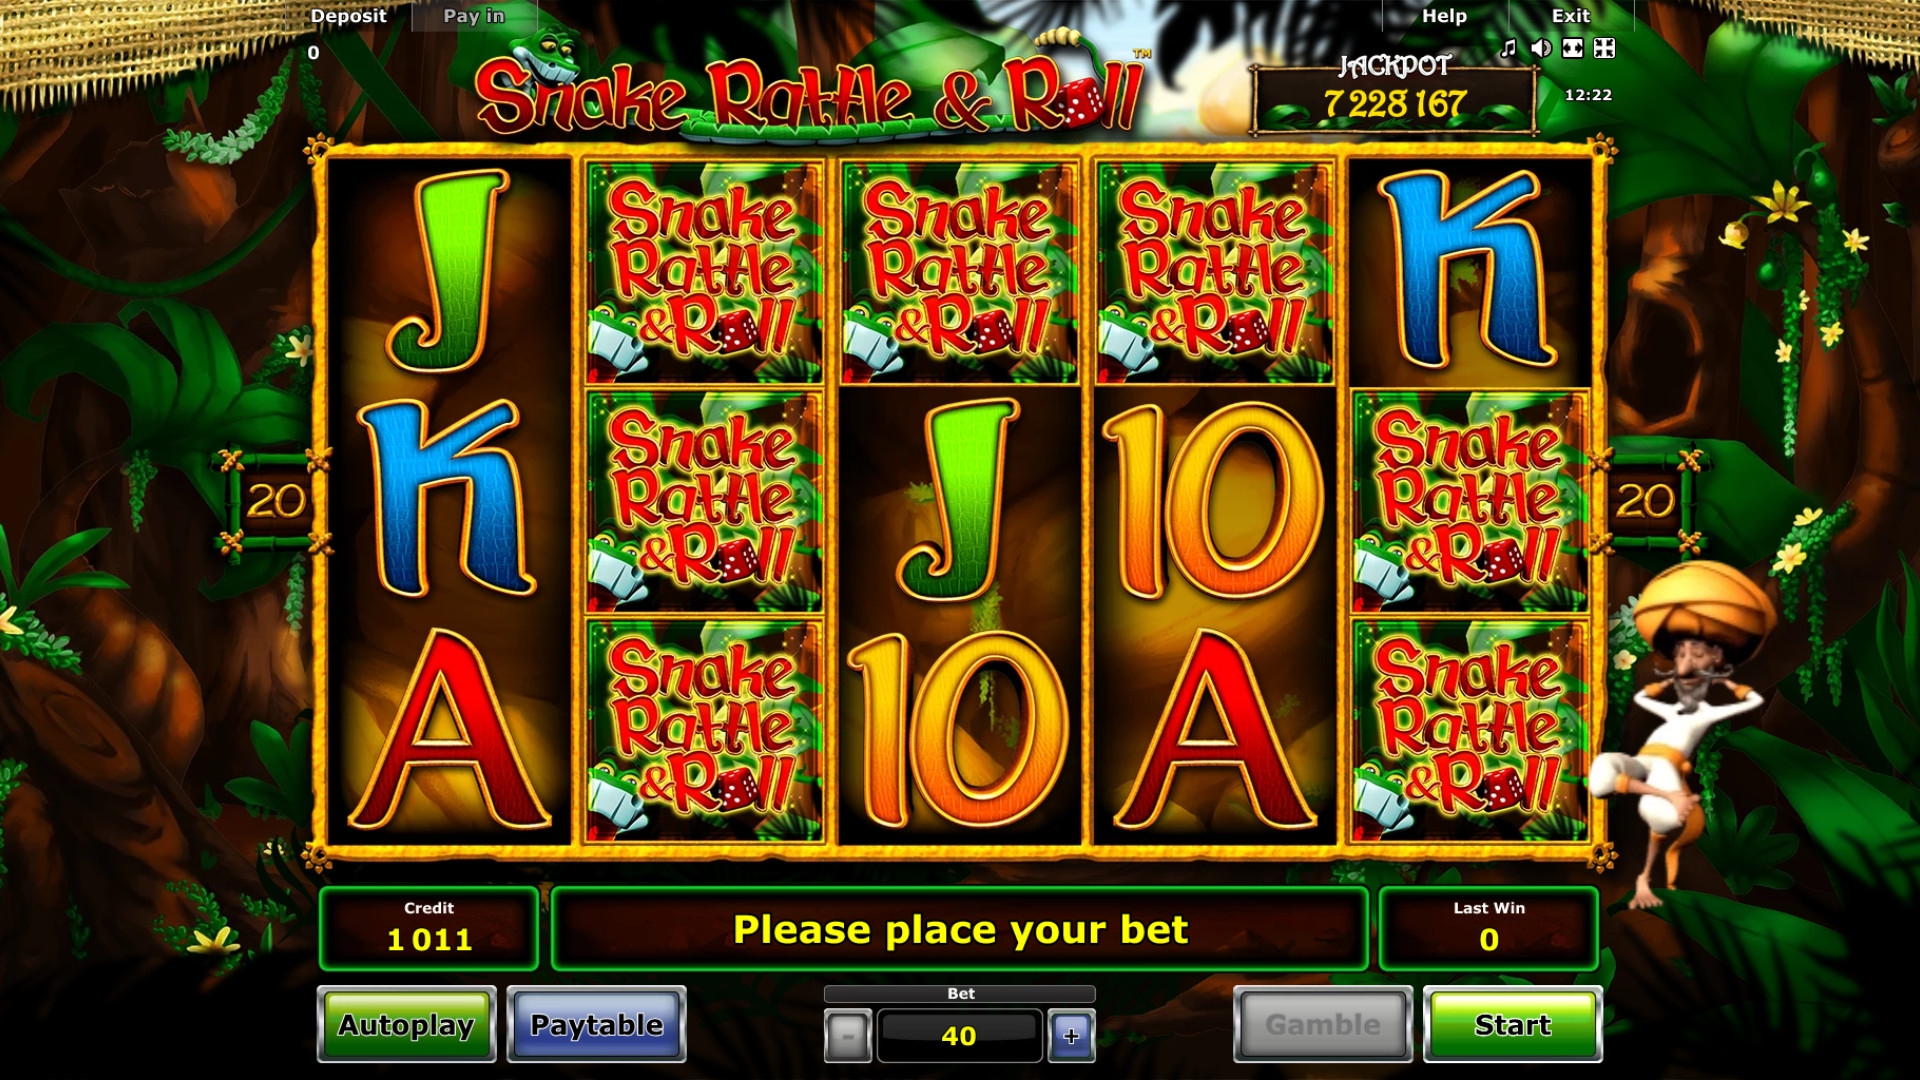 Snake Rattle & Roll Free Online Slots slot machine games online win real money 